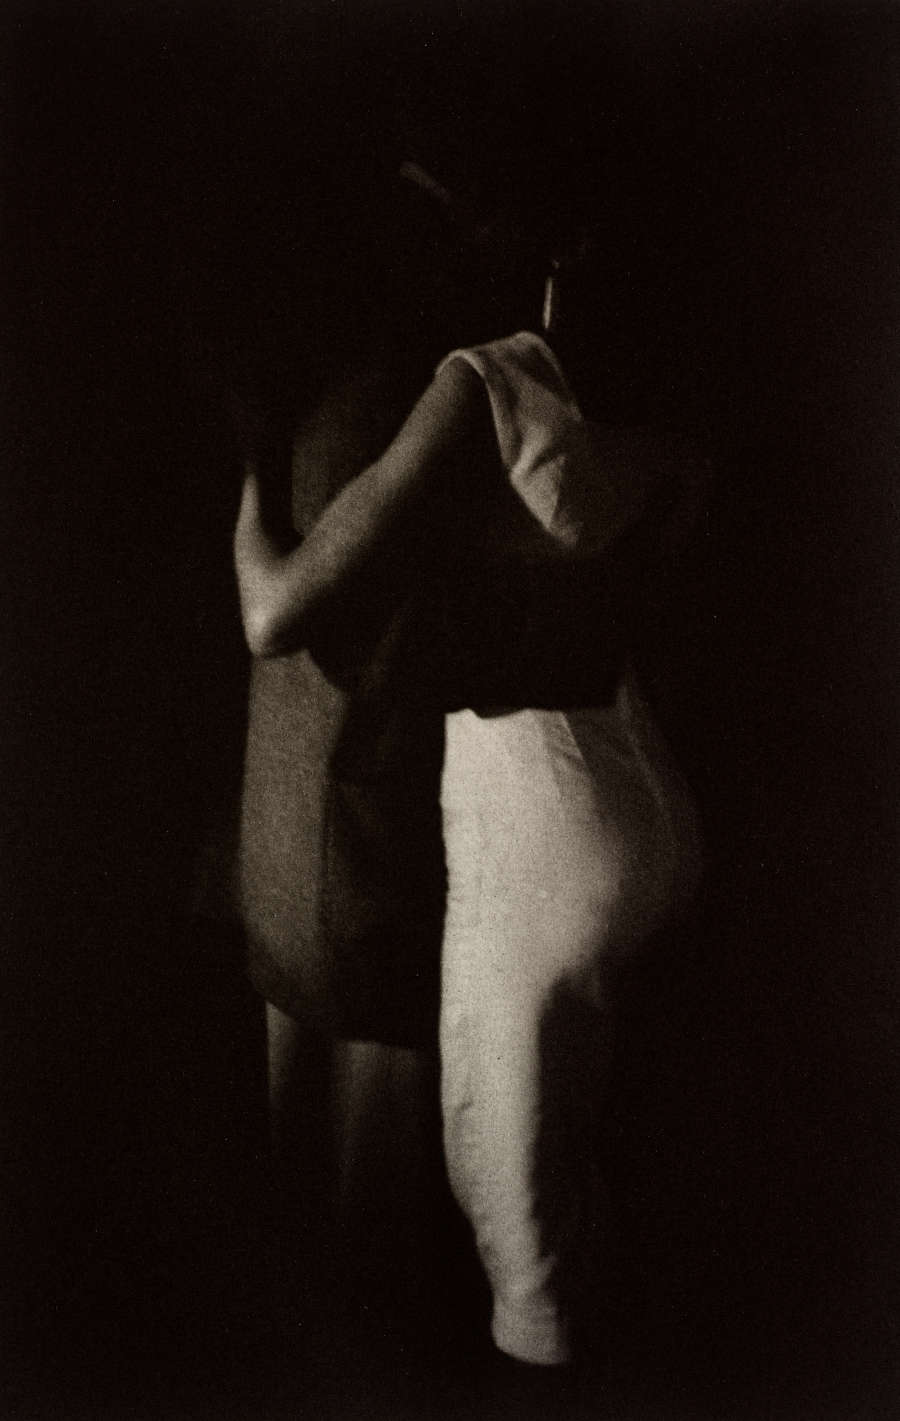 Black and white photo of two people dancing together, their arms around each other. Their faces and much of their bodies are completely obscured by shadows.